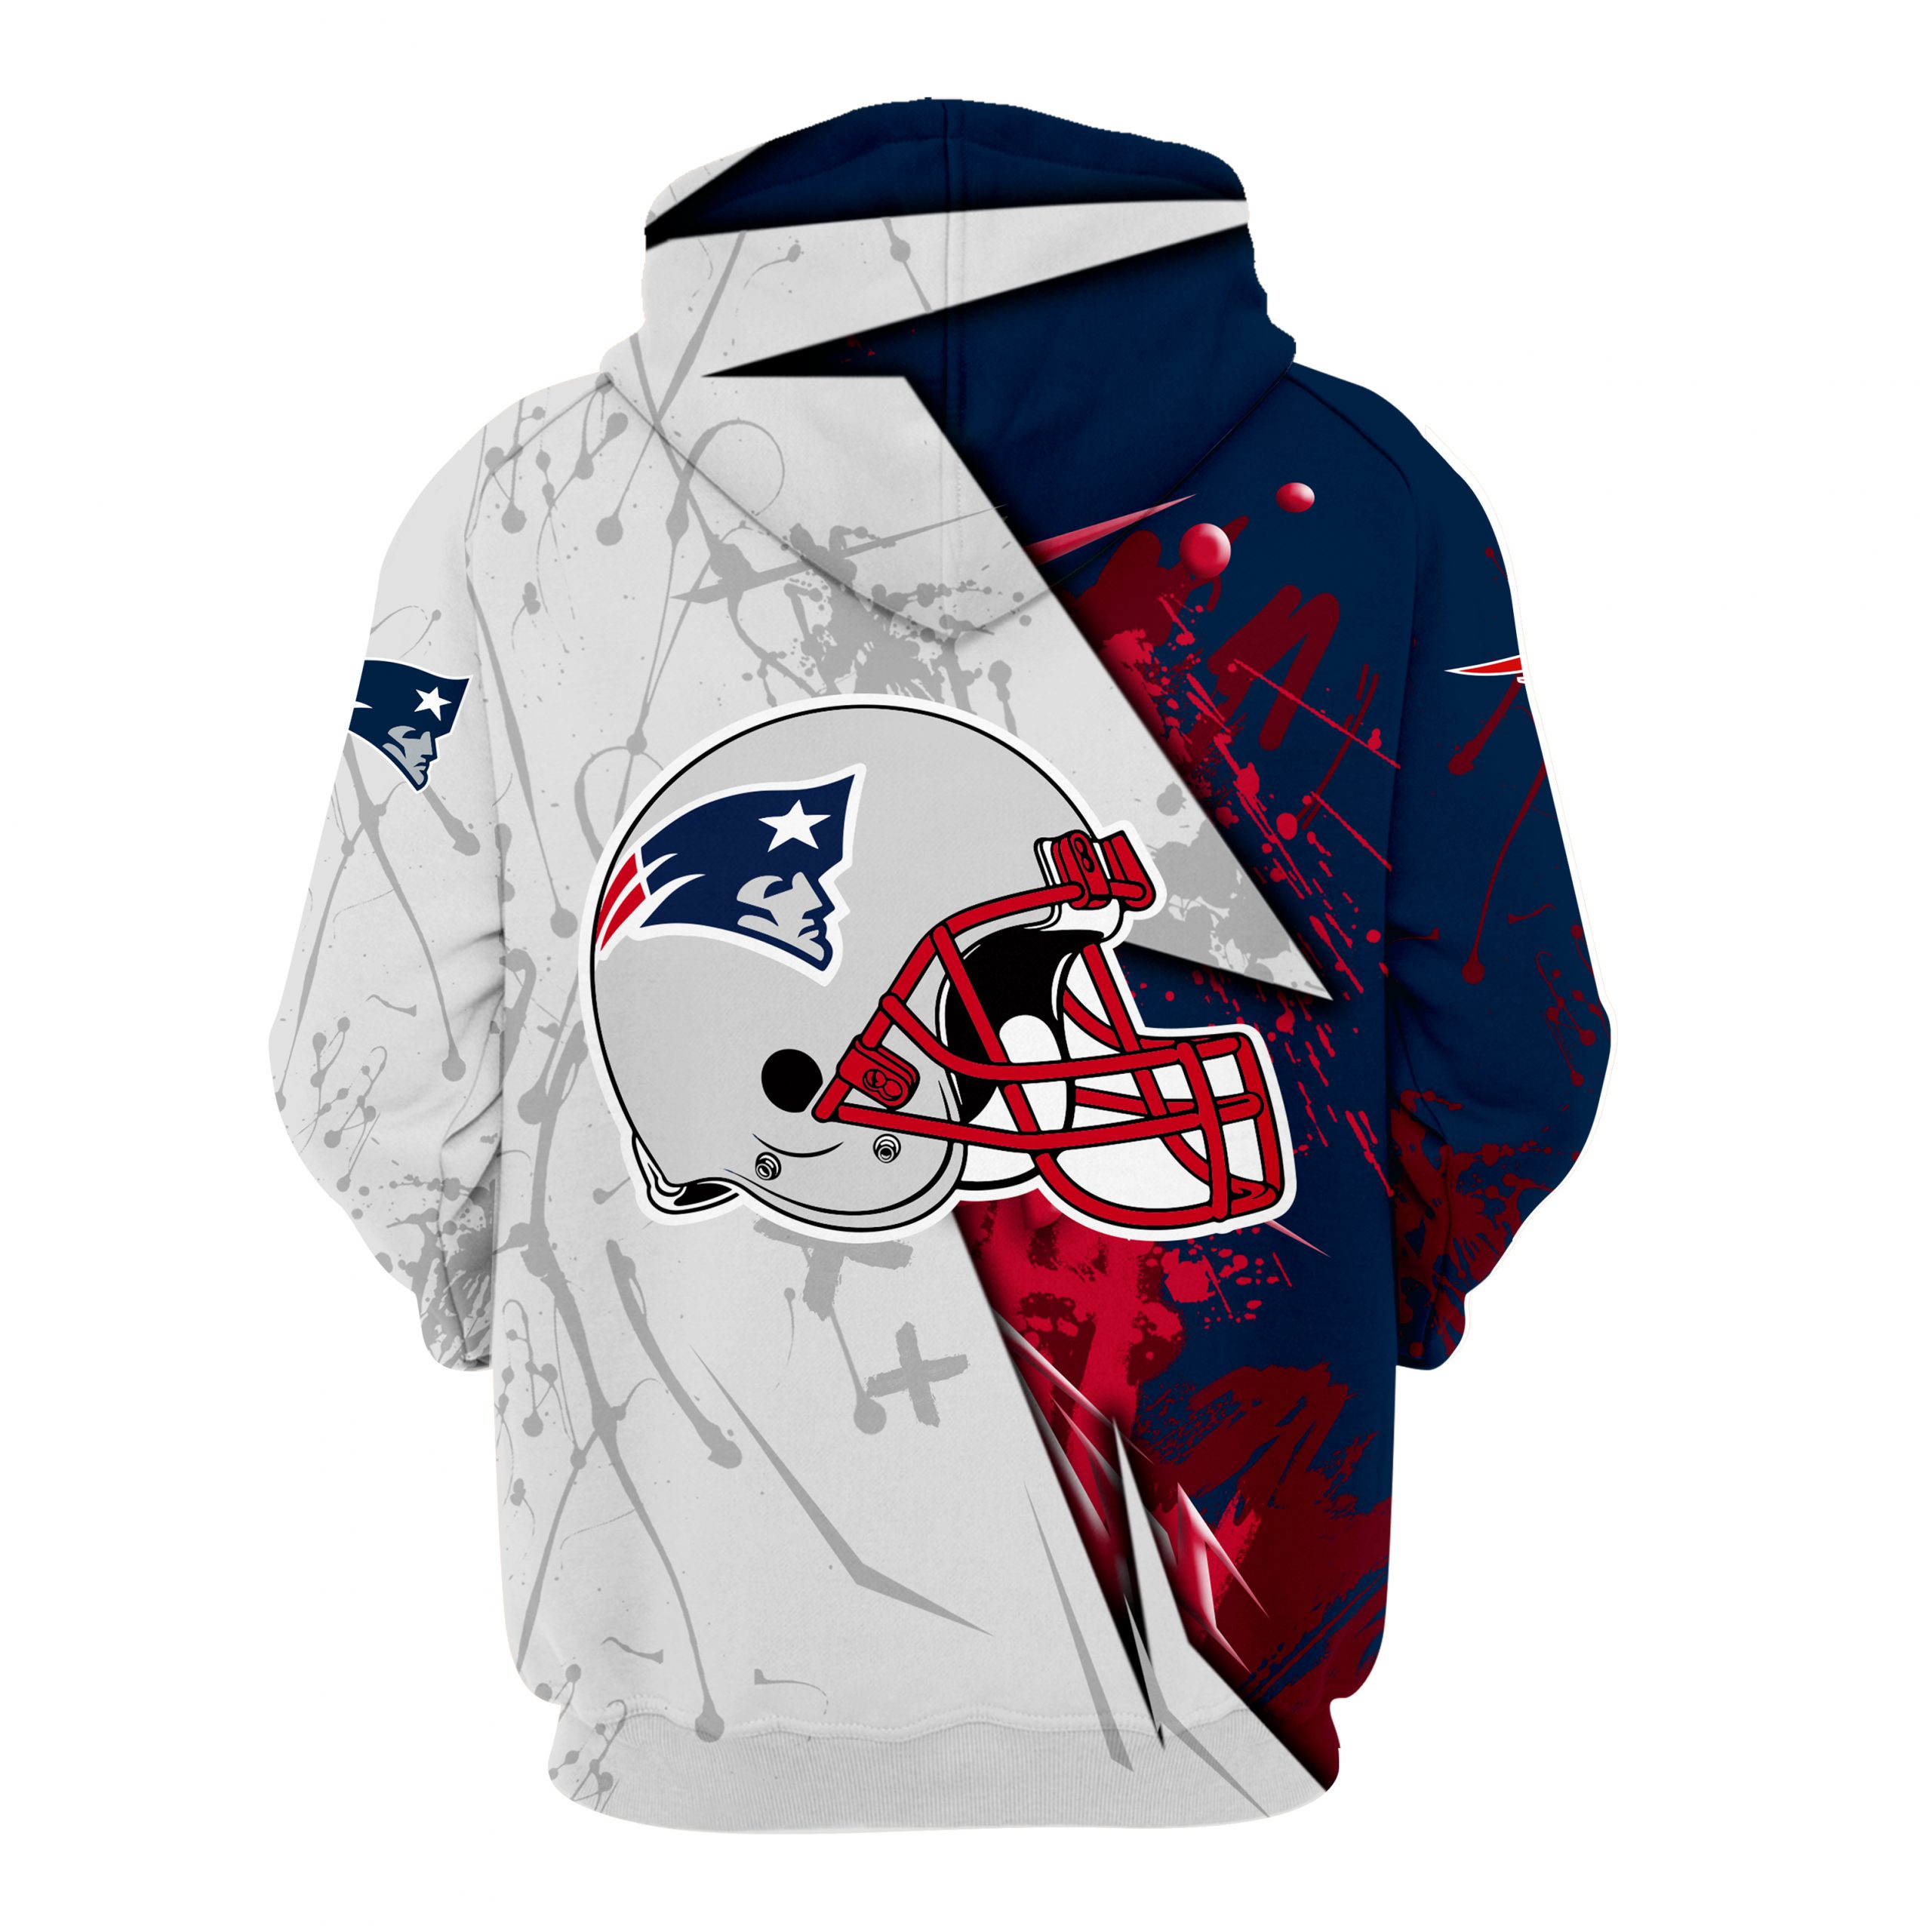 NFL new england patriots all over printed hoodie -back